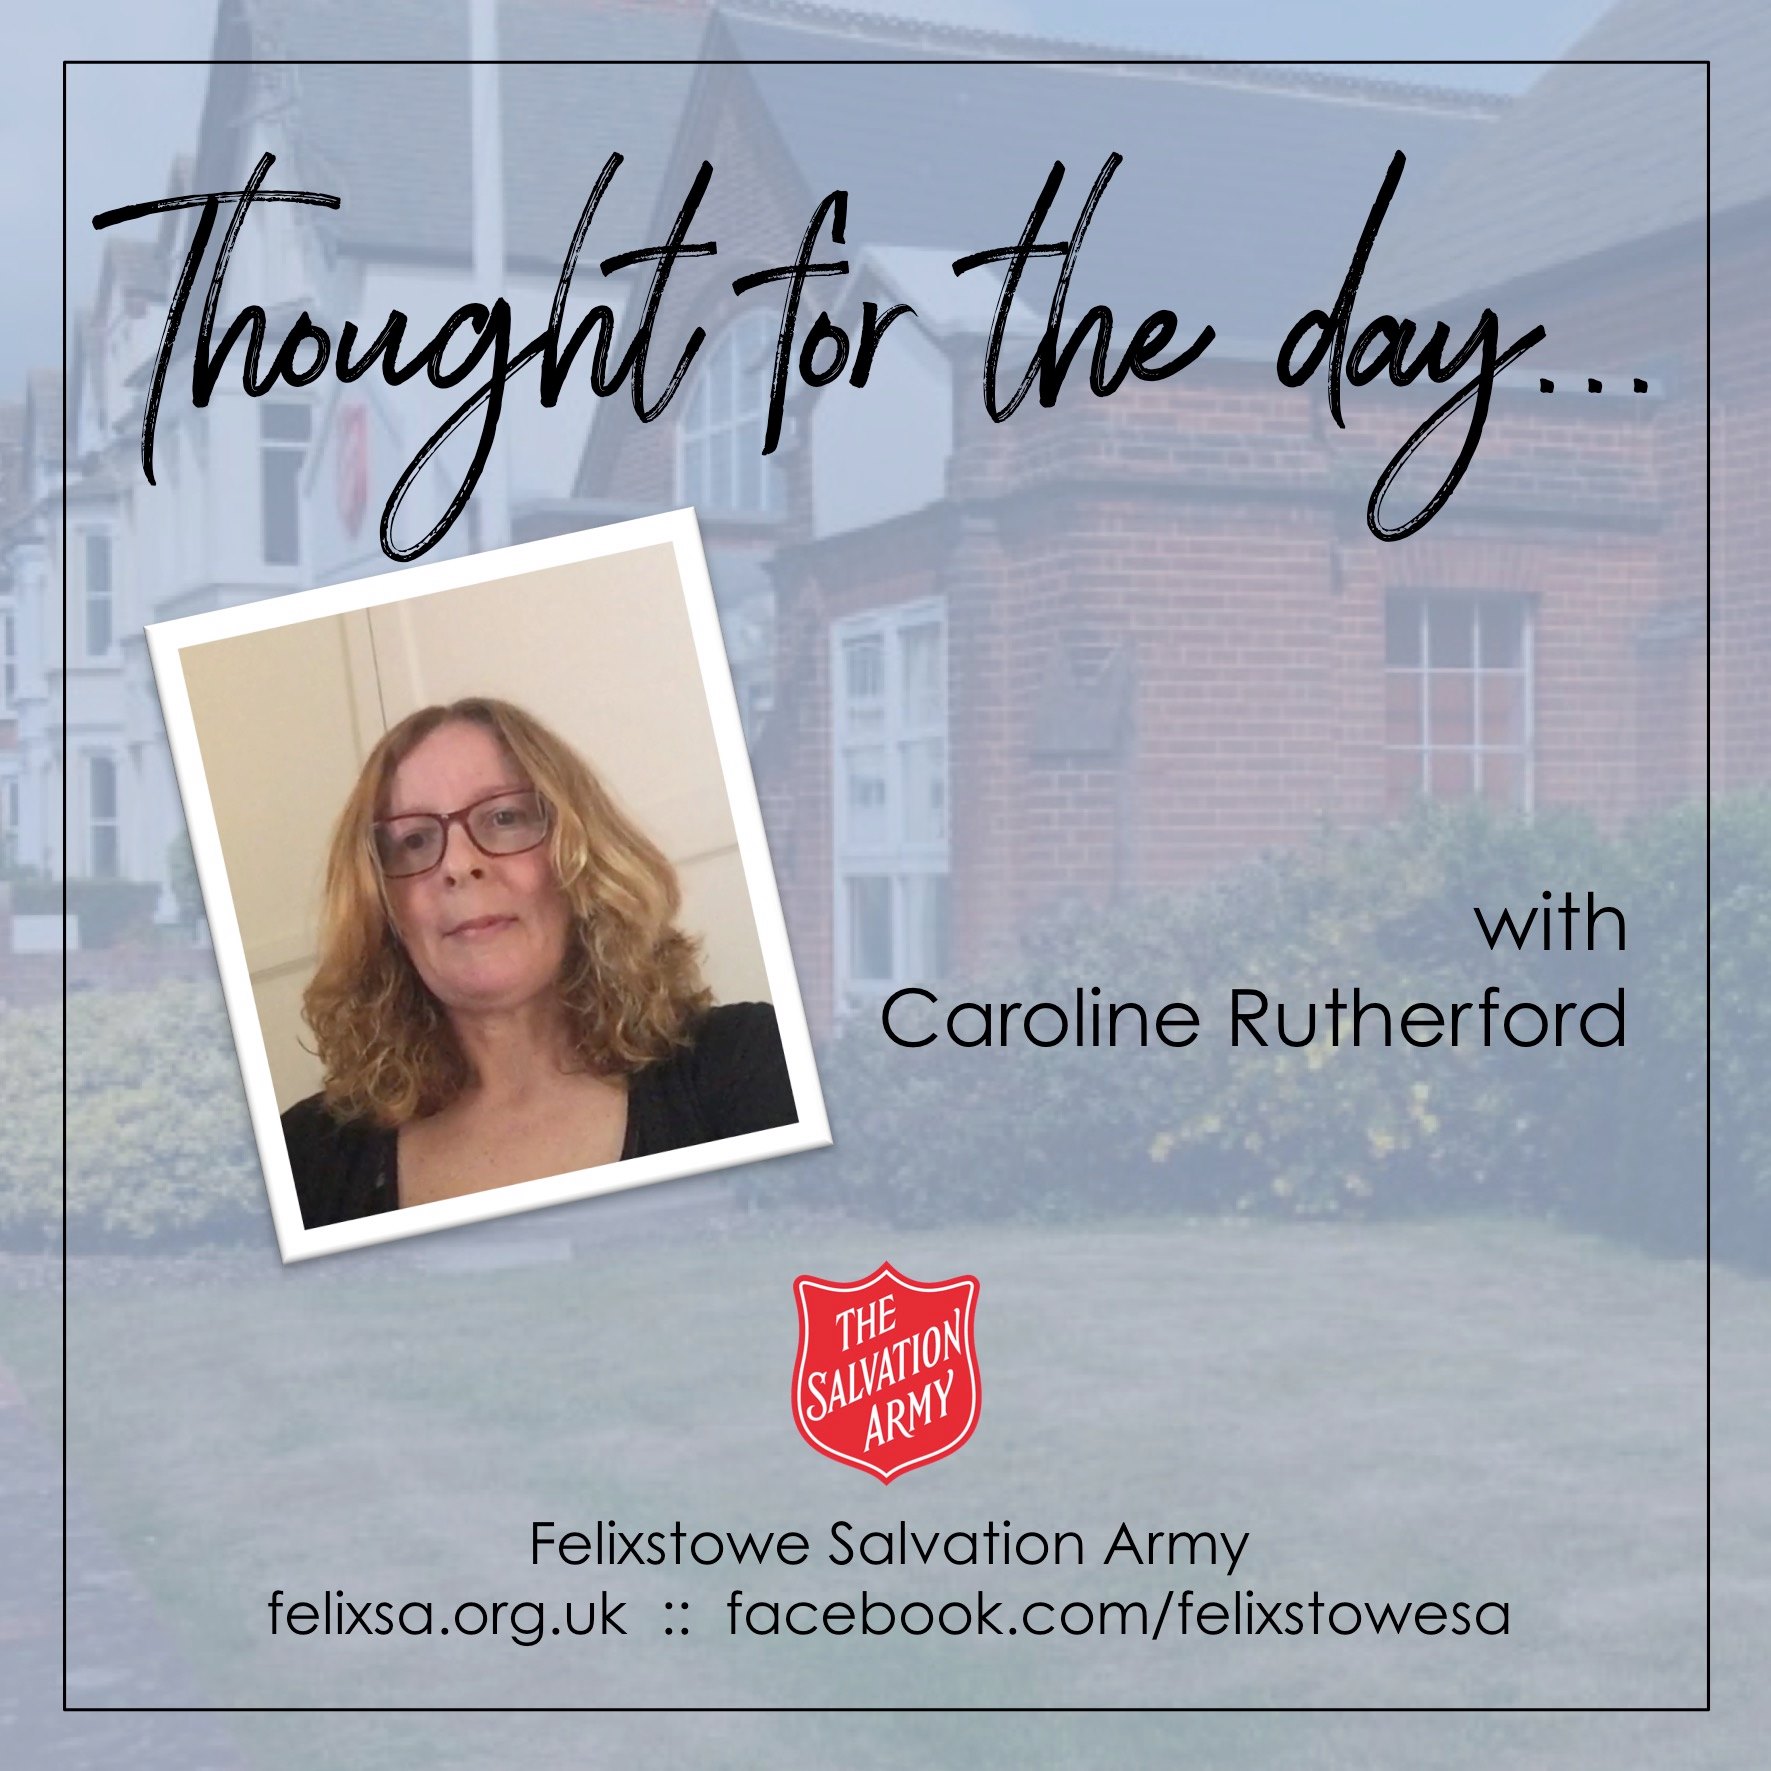 Thought for the Day with Caroline Rutherford